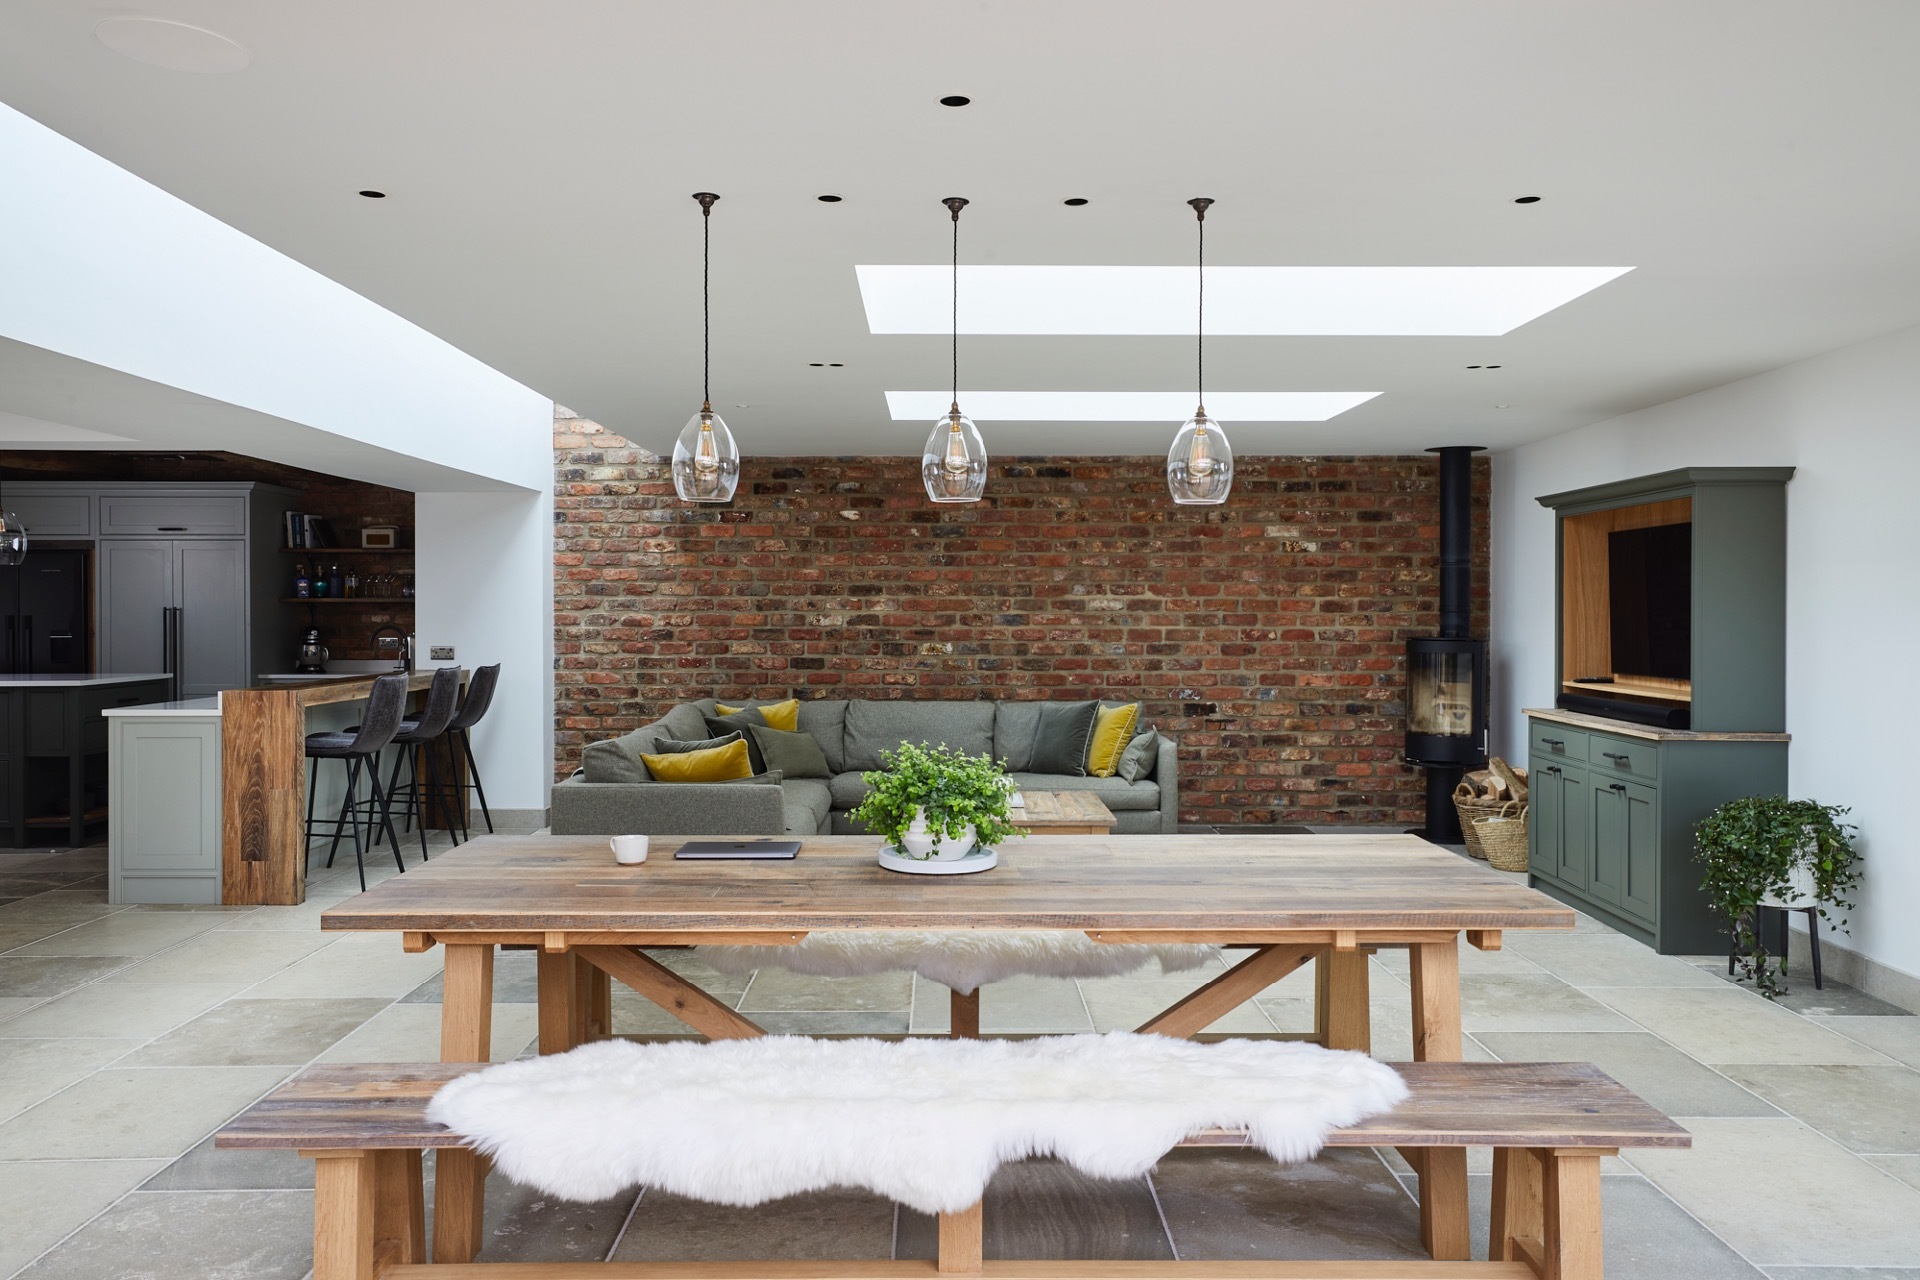 Kitchen/diner/family area with roof lights giving additional natural light.  Two walls tiled with brick slips.